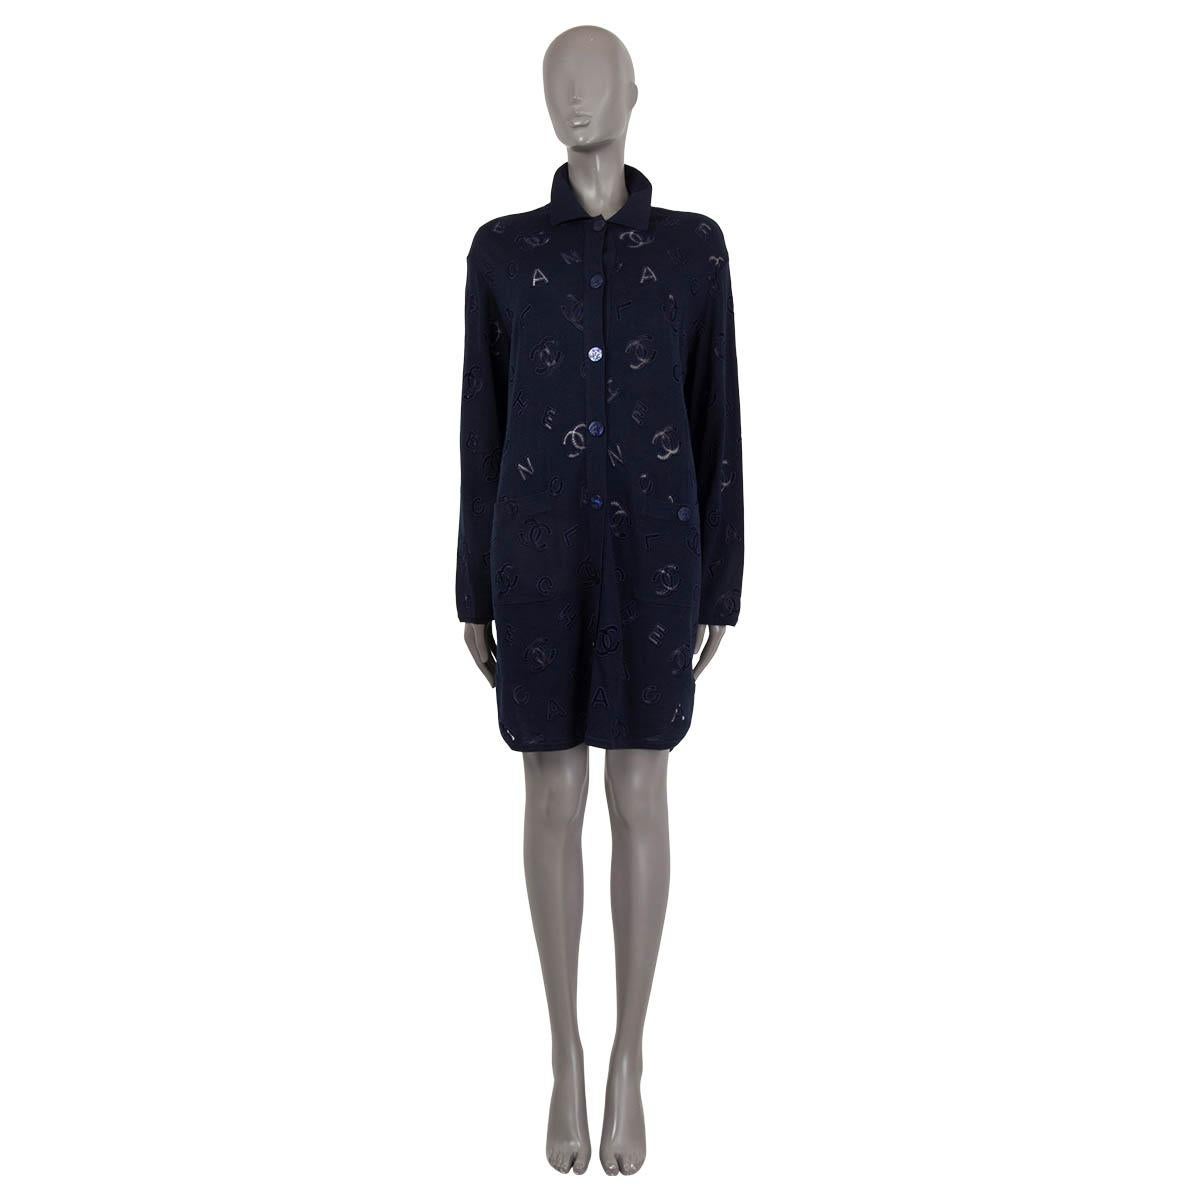 100% authentic Chanel collared oversized long cardigan in navy blue cotton (70%) and cashmere (30%). Features logo broderie anglaise embroidery and two patch pockets on the front. Closes with CC mother-of-pearl buttons on the front. Has been worn